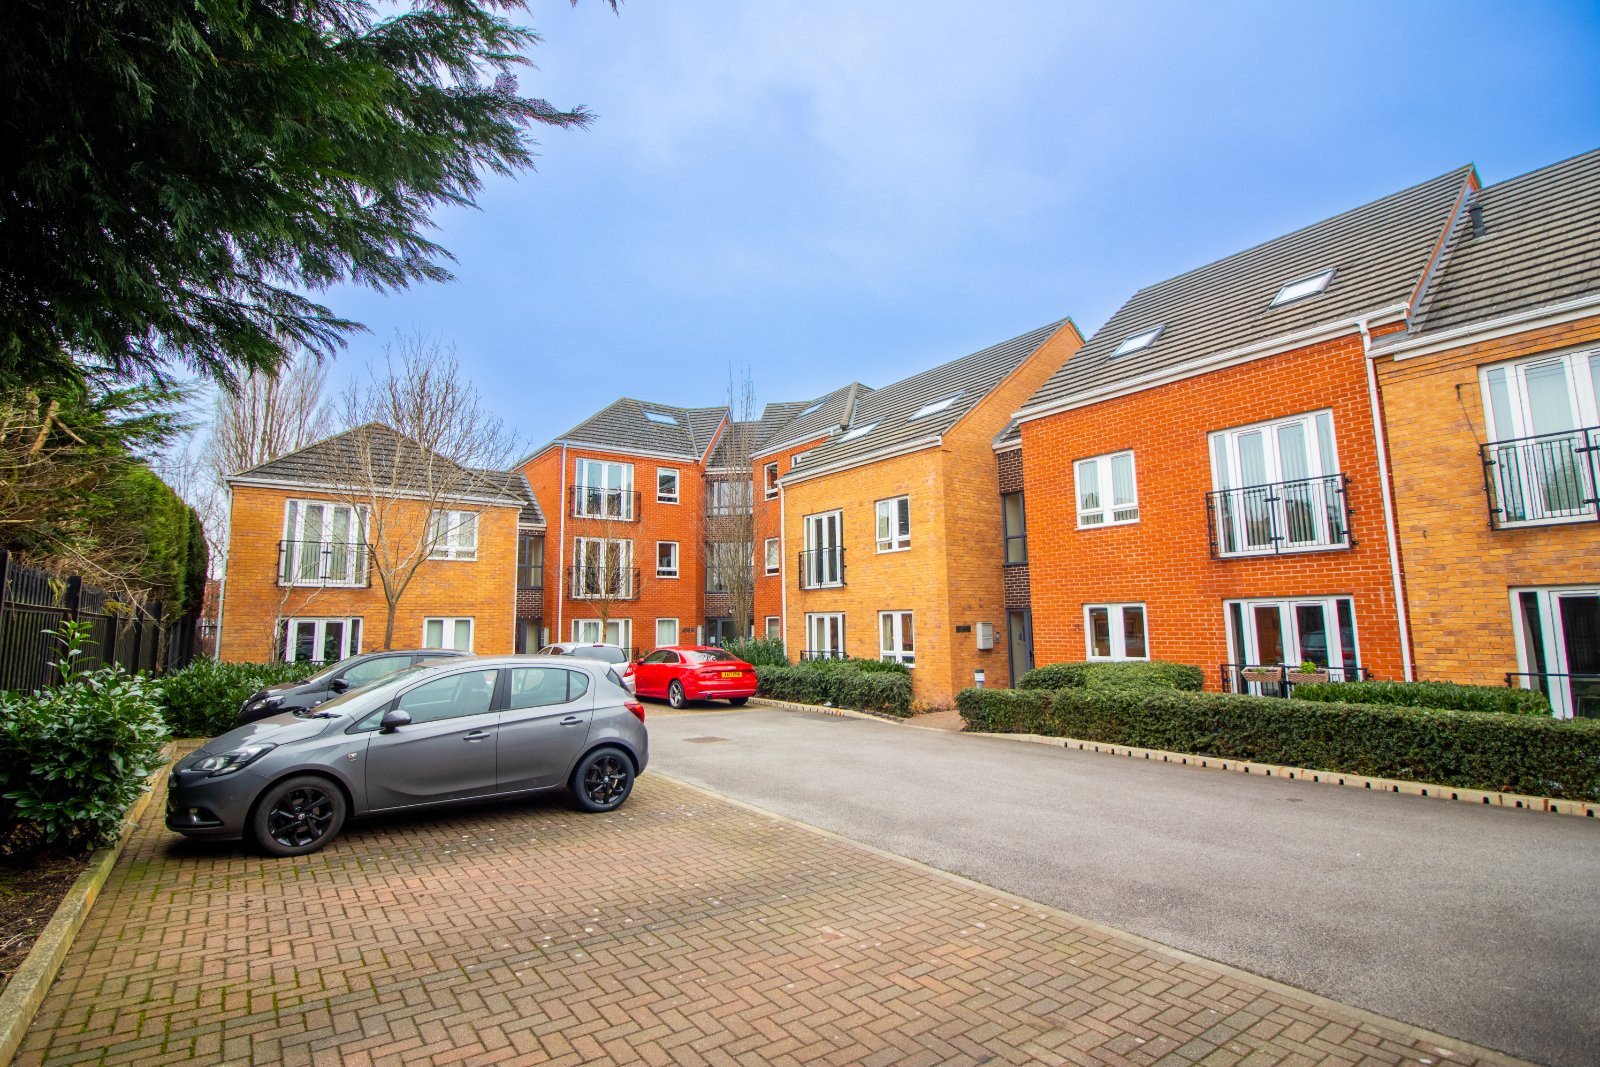 2 bed apartment for sale in Radcliffe Road, Gamston - Property Image 1